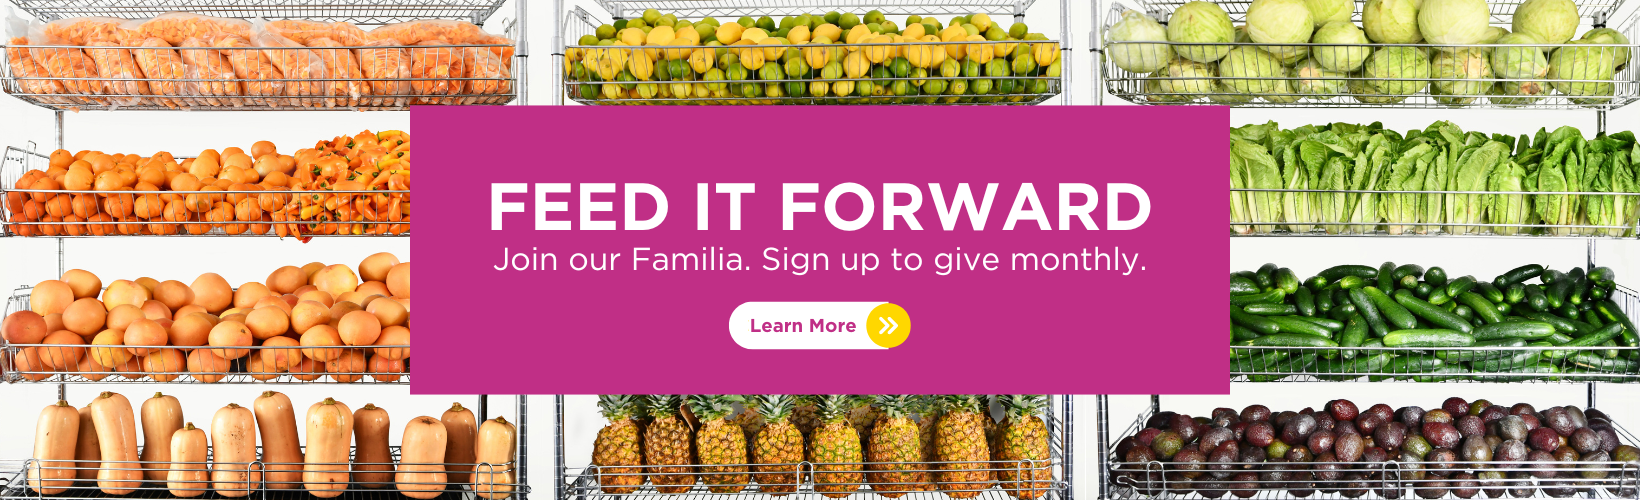 feed it forward with the Feeding South Florida® monthly giving program.